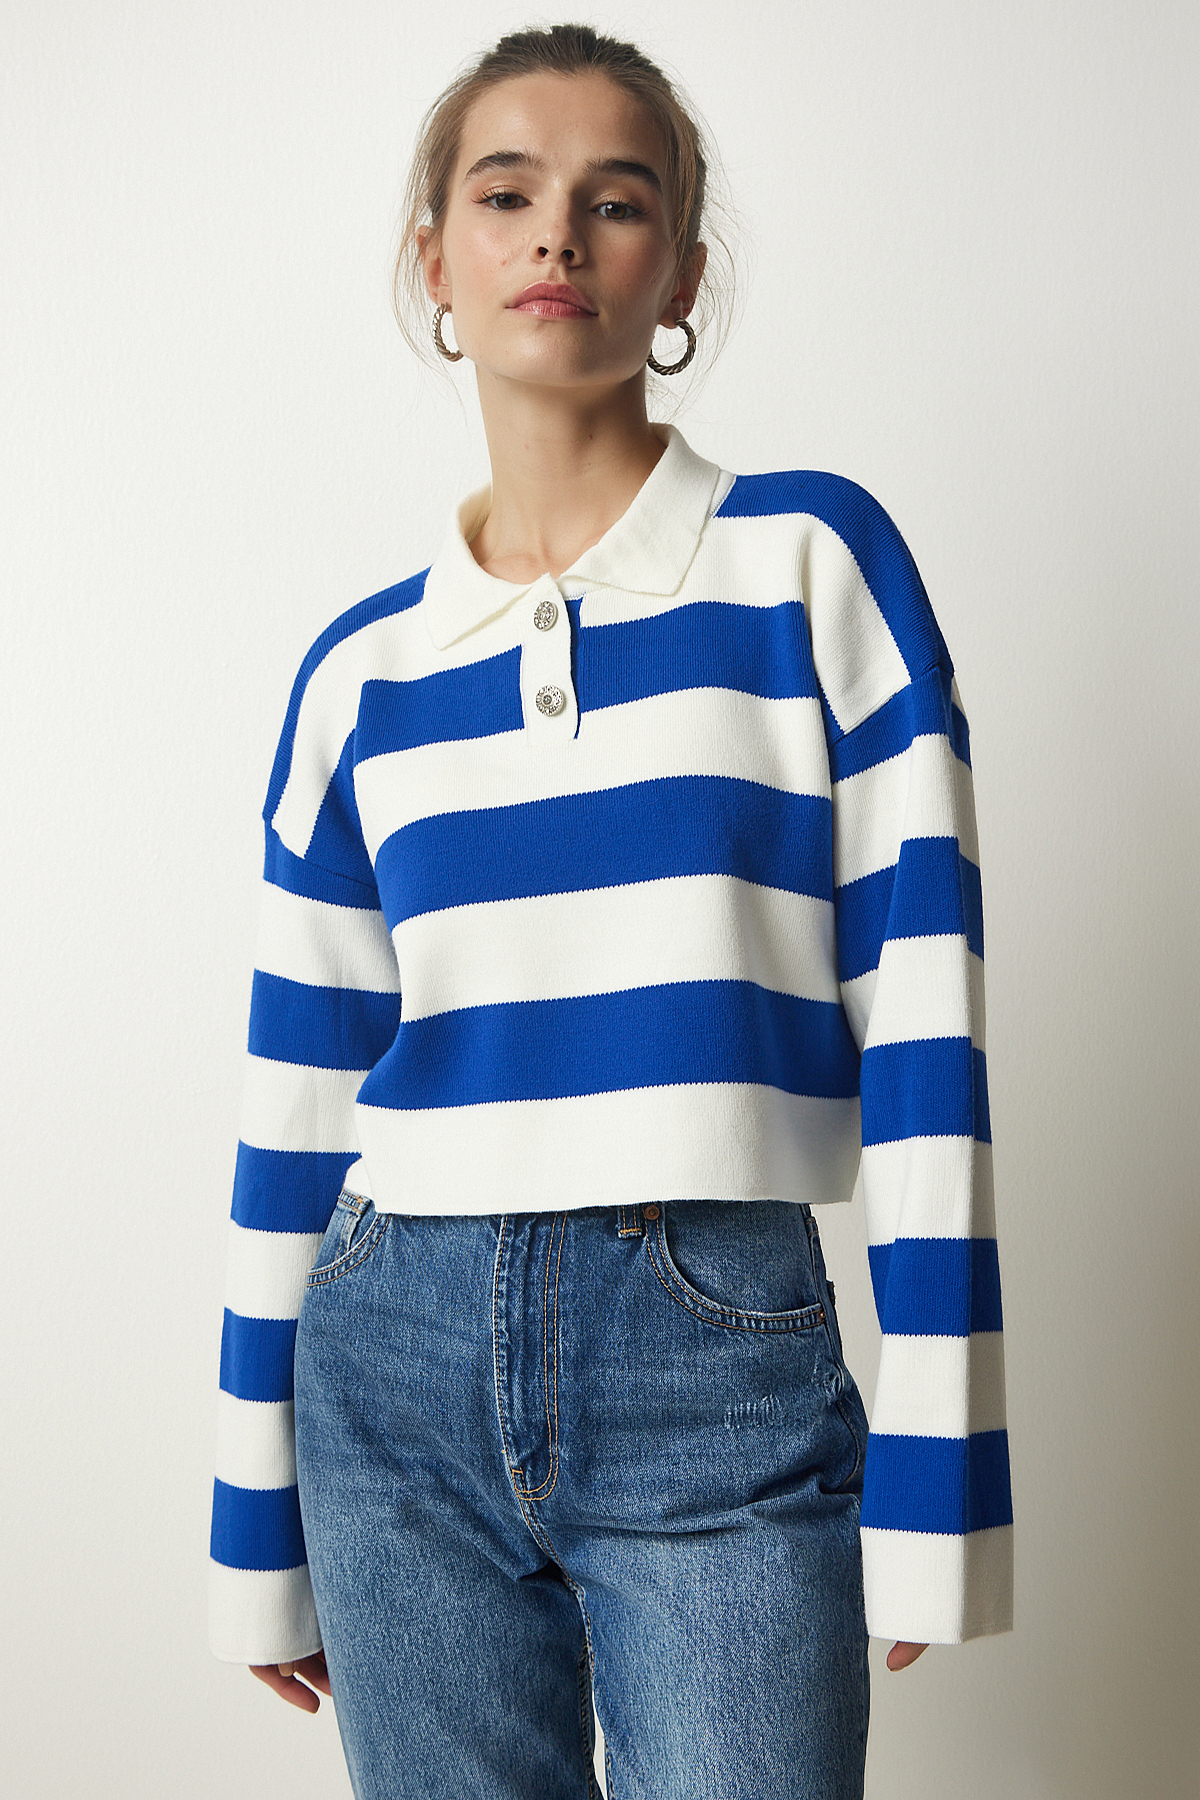 Levně Happiness İstanbul Women's White Blue Stylish Buttoned Collar Striped Crop Knitwear Sweater